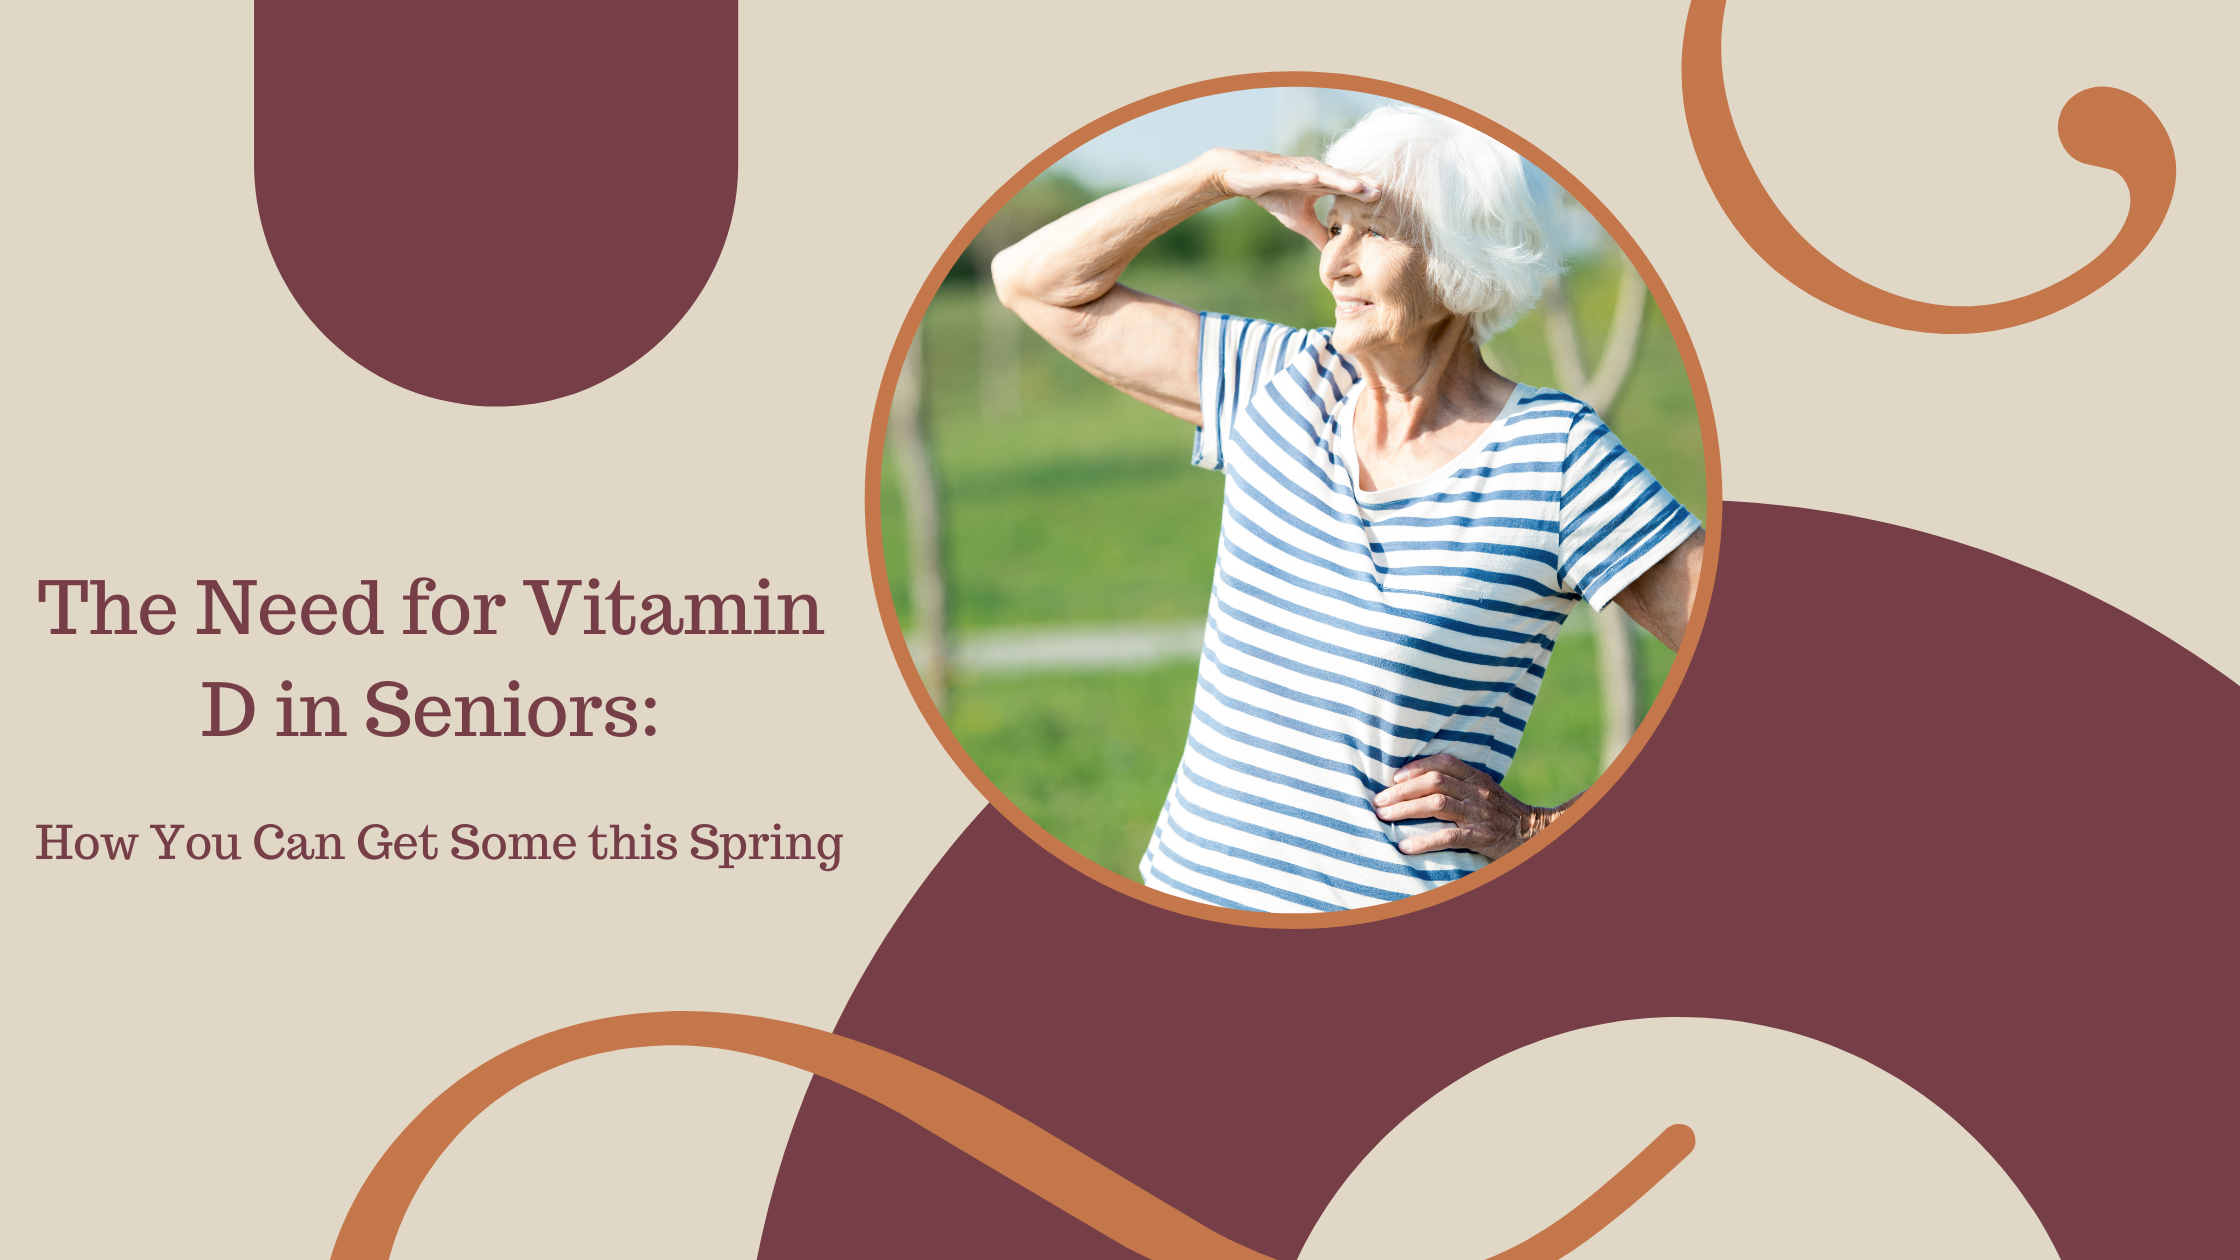 The Need for Vitamin D in Seniors